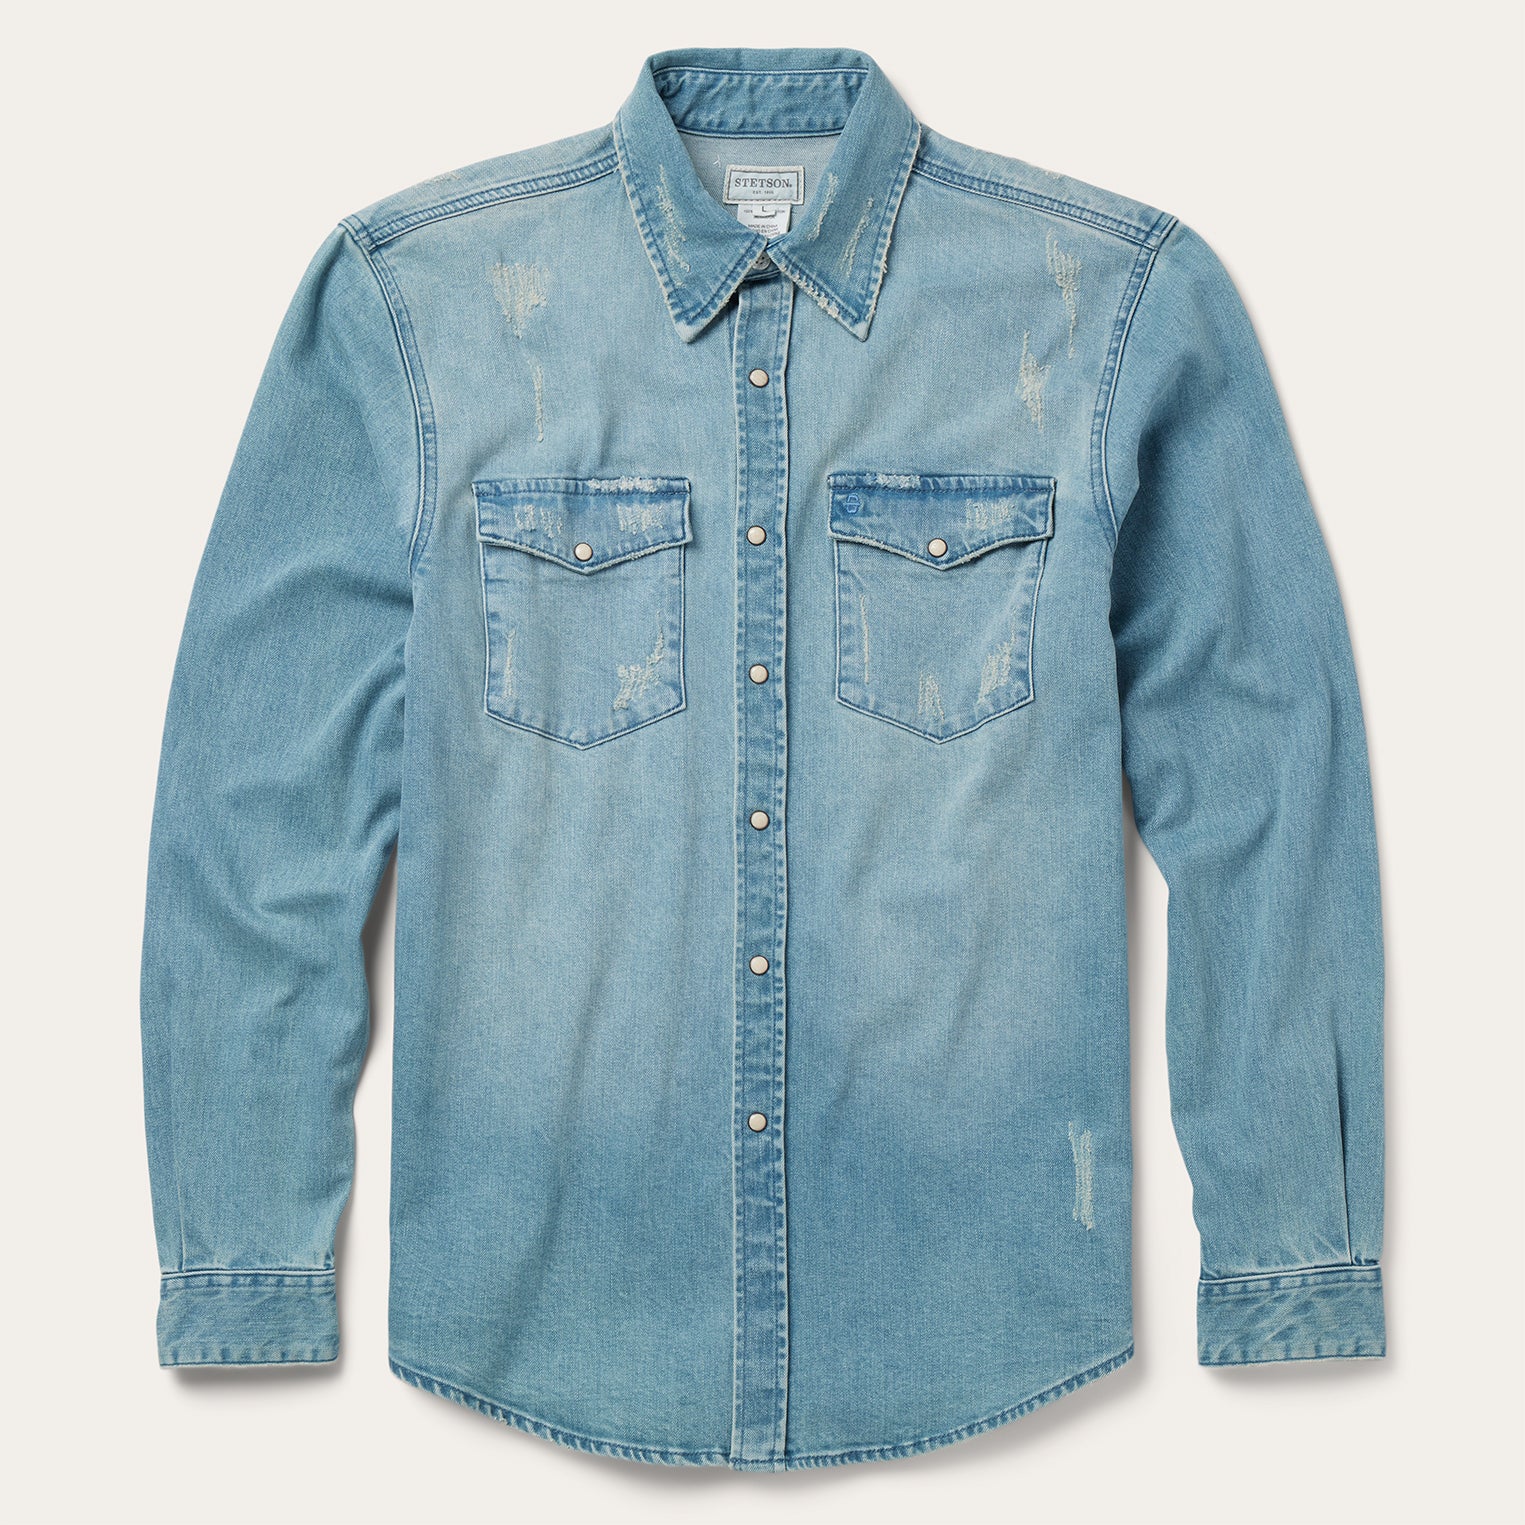 Tailored Denim Button Up with Elbow Patches | Tailored shirts, Denim button  up, Style snaps